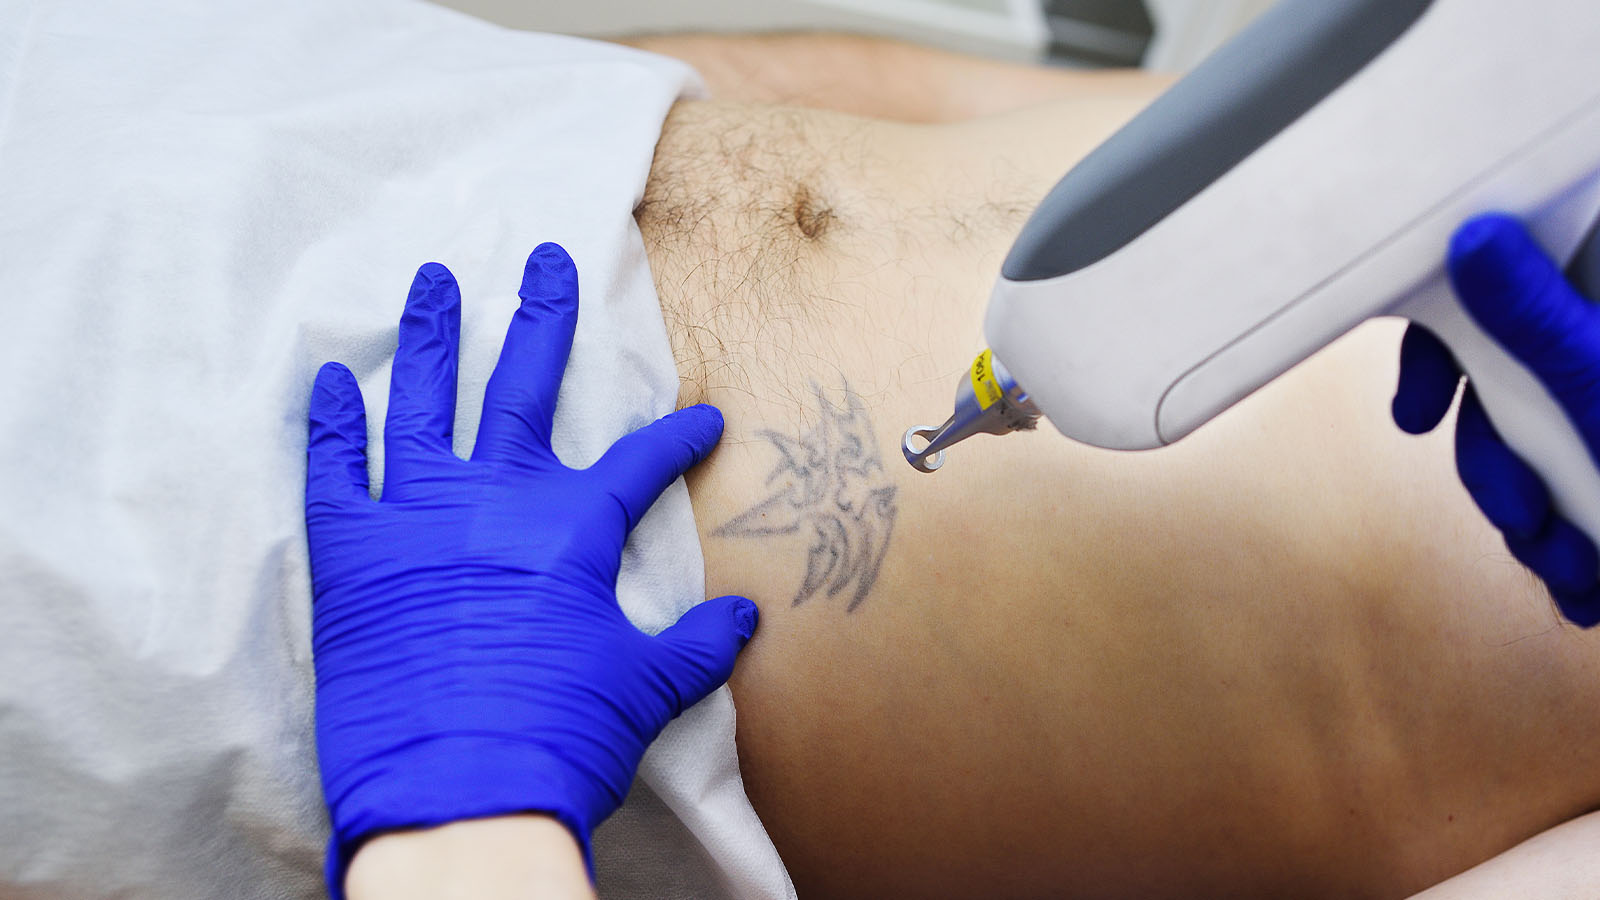 Removing Tattoos with the Picosecond Laser at Bodyland